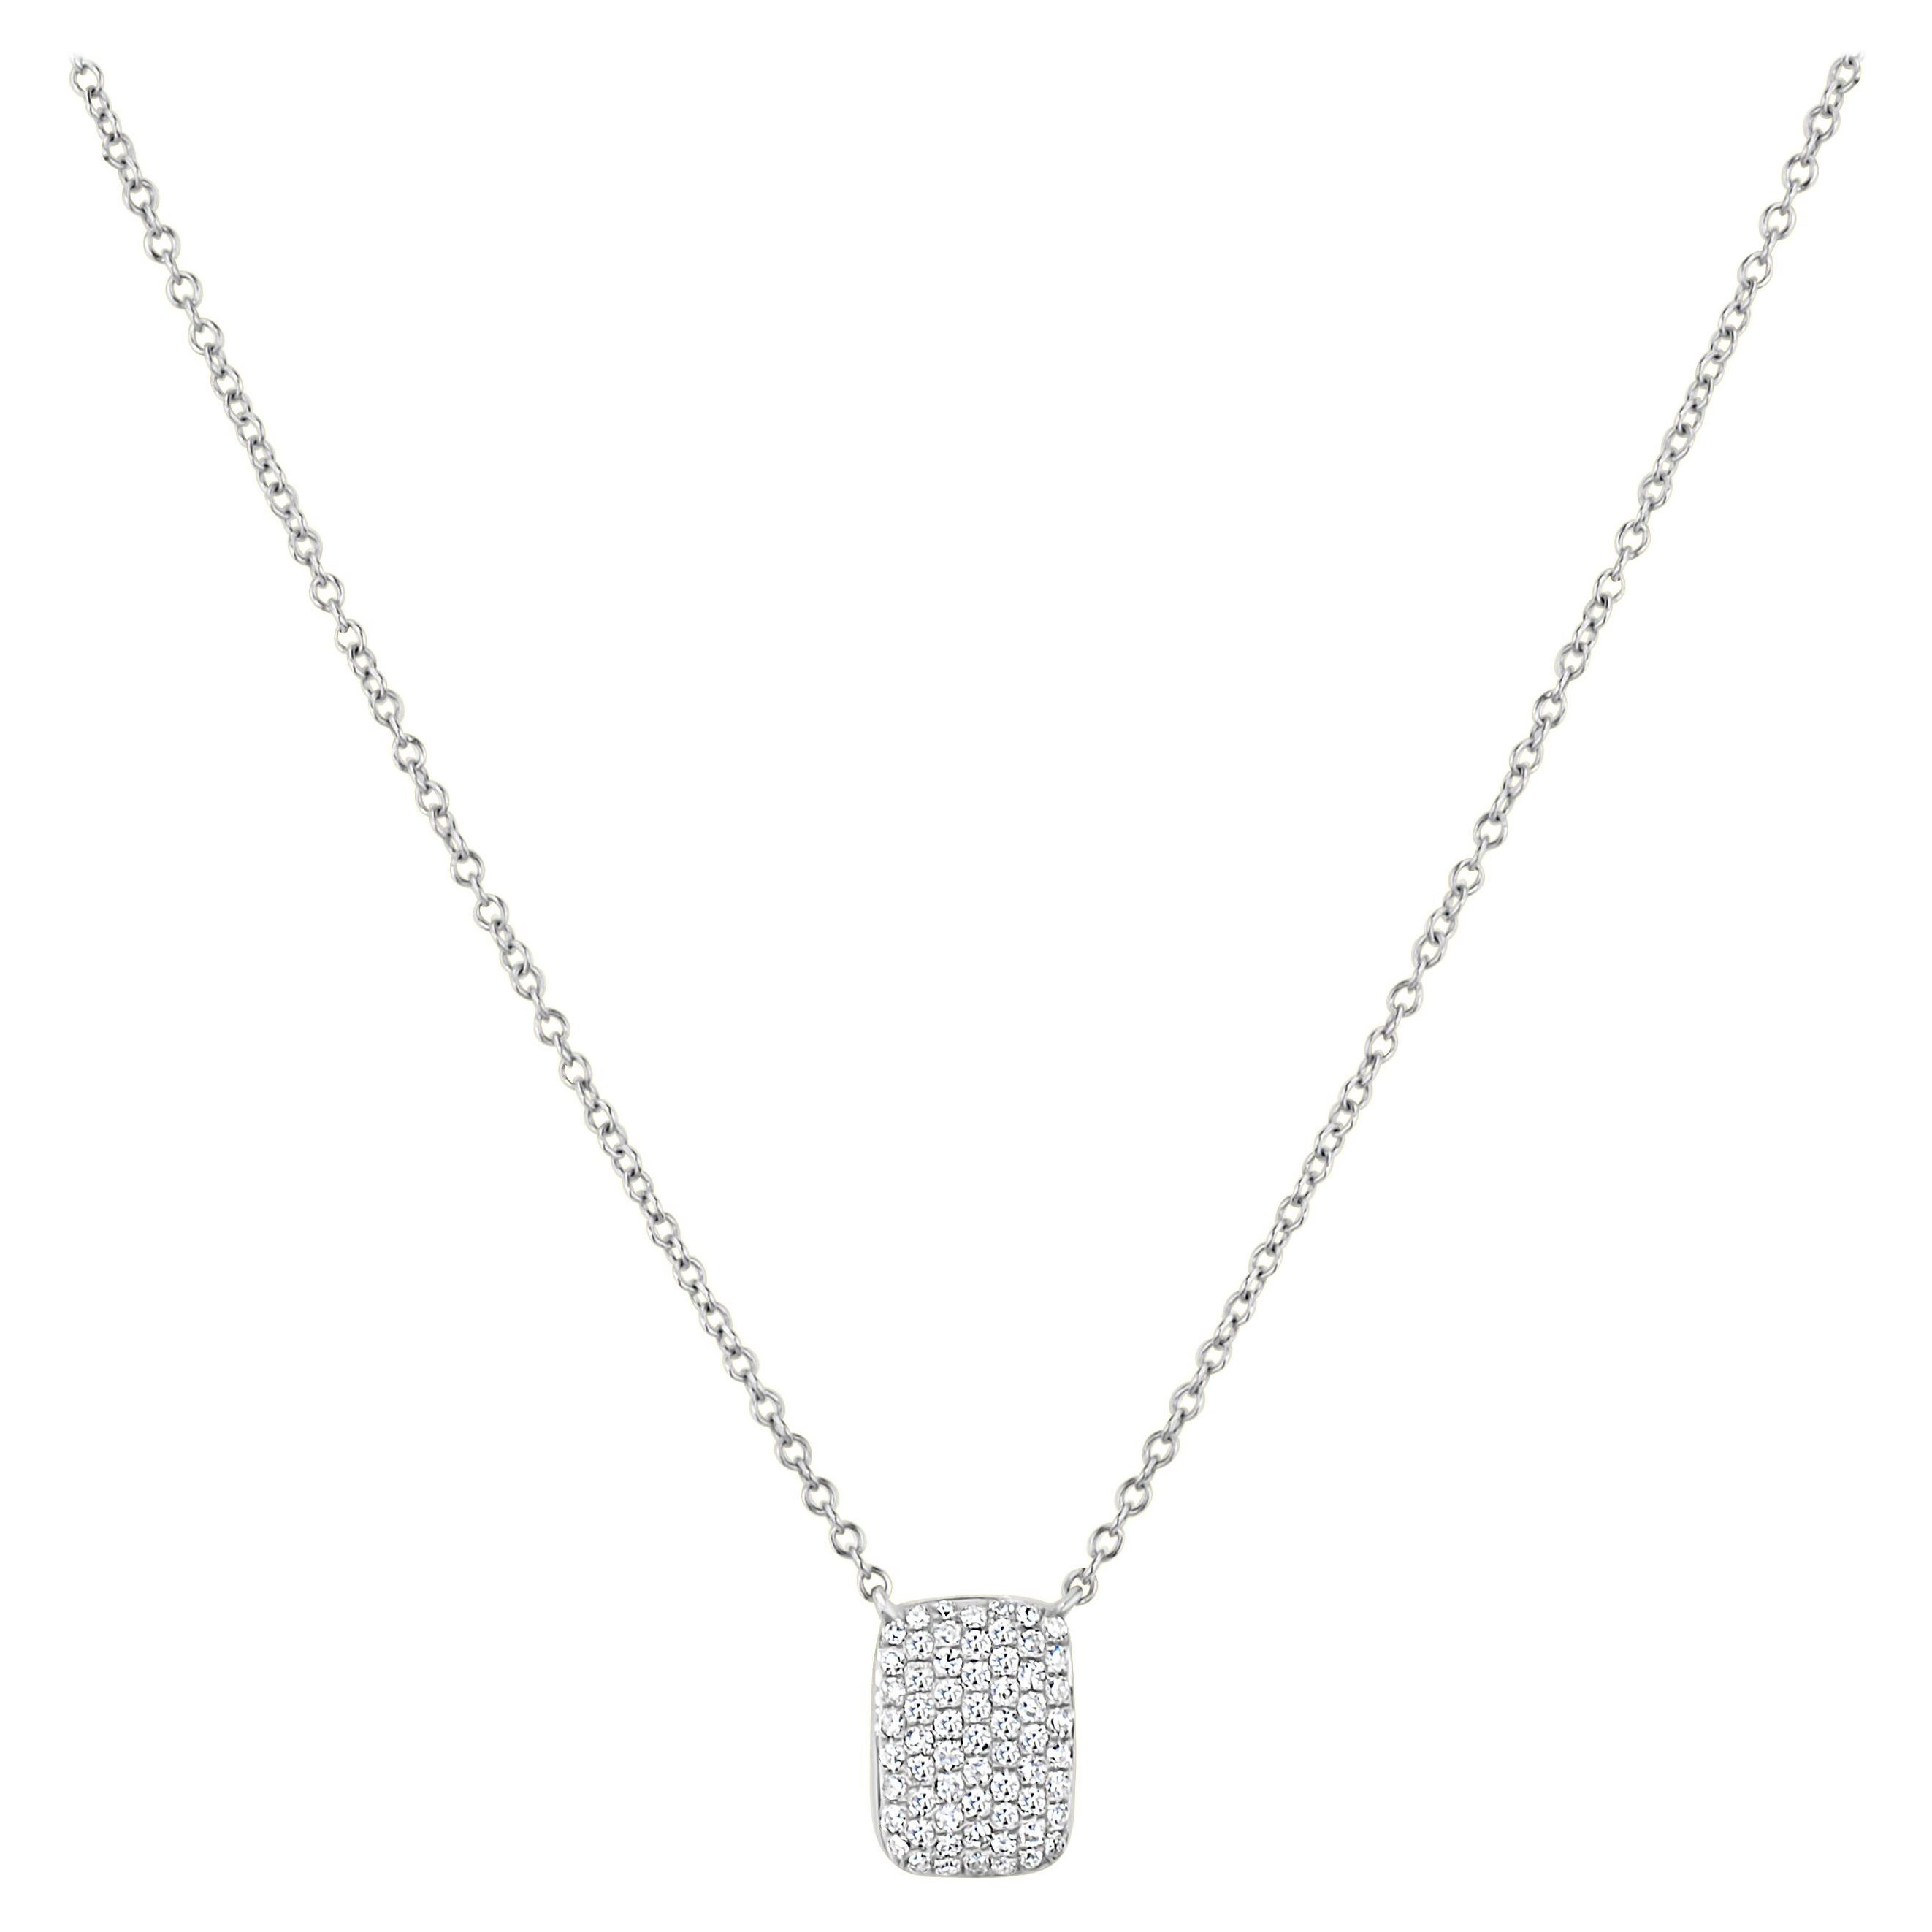 Luxle Oval-Shaped Diamond Cluster Pendant Necklace in 18k White Gold ...